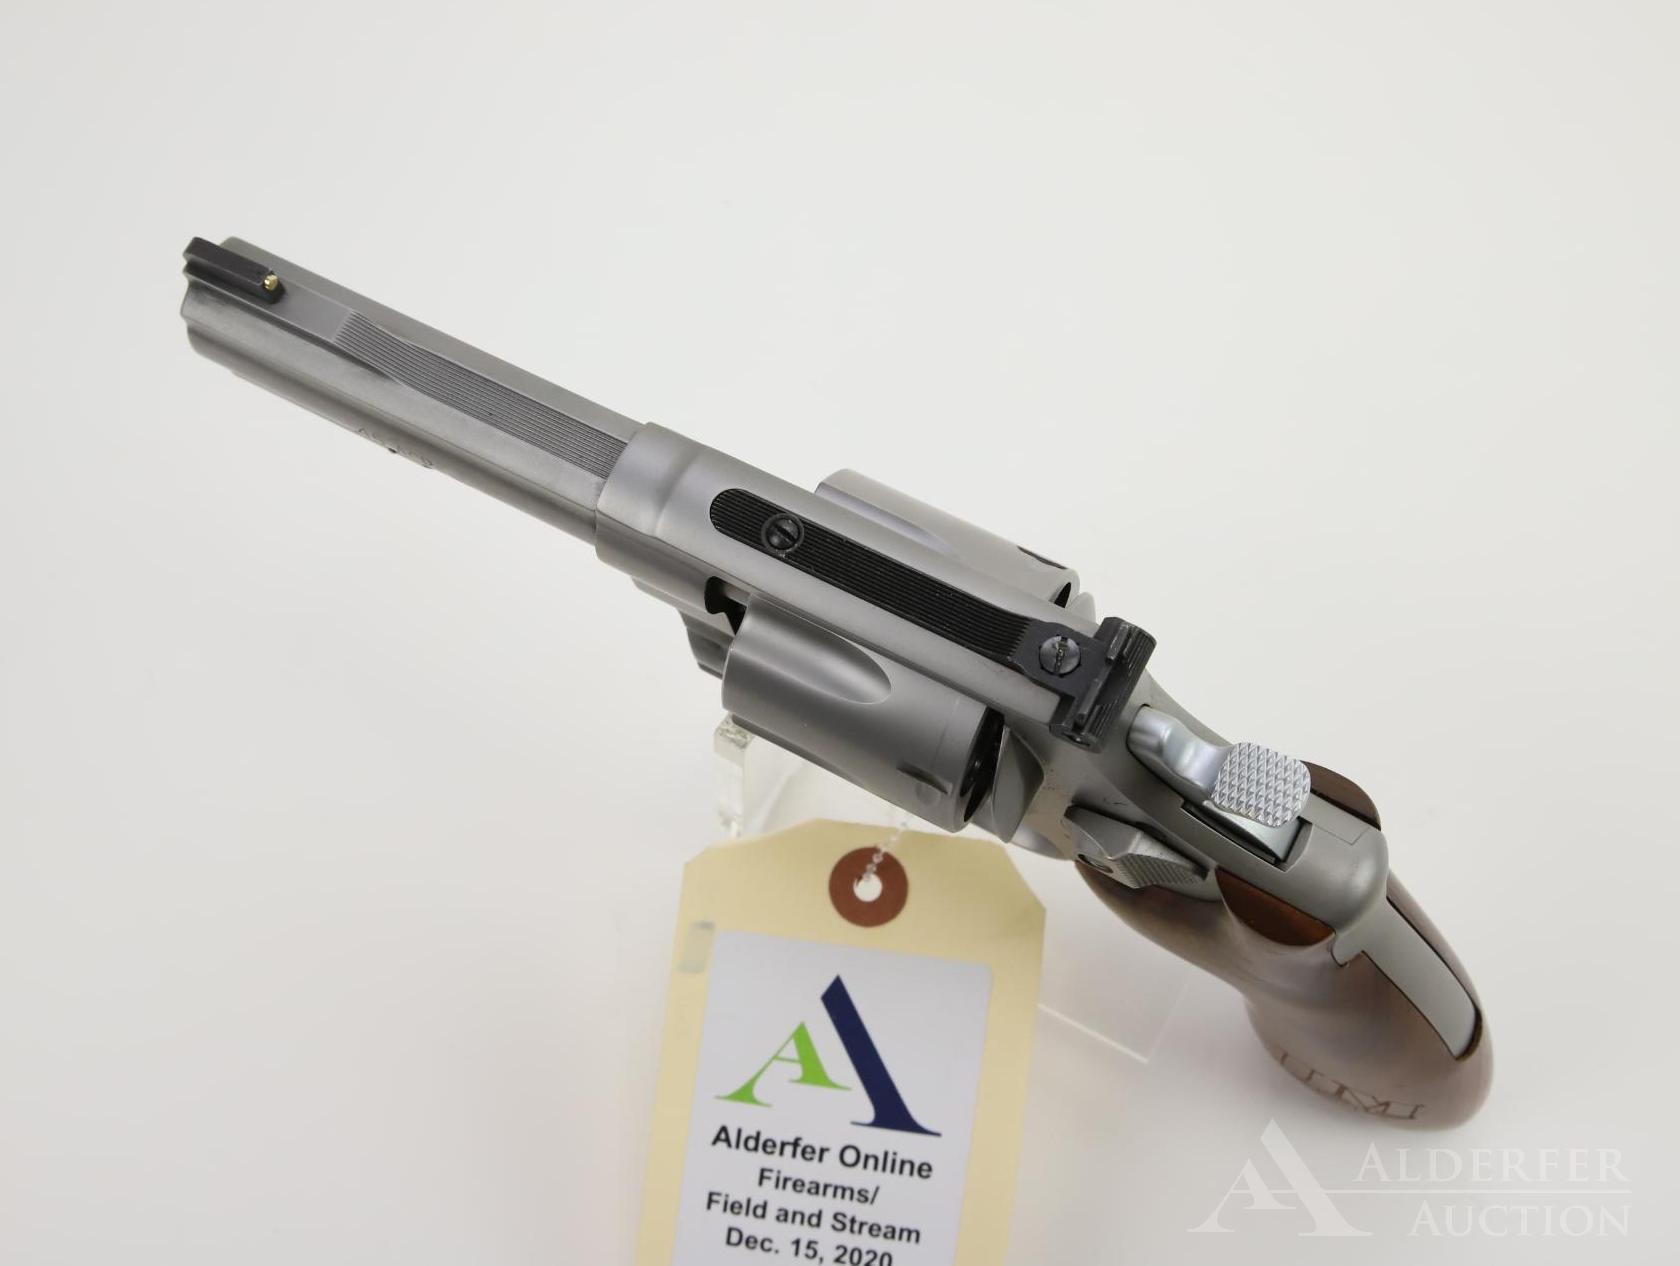 Smith & Wesson 625-8 JM (Jerry Miculek speed shooter edition) double action revolver